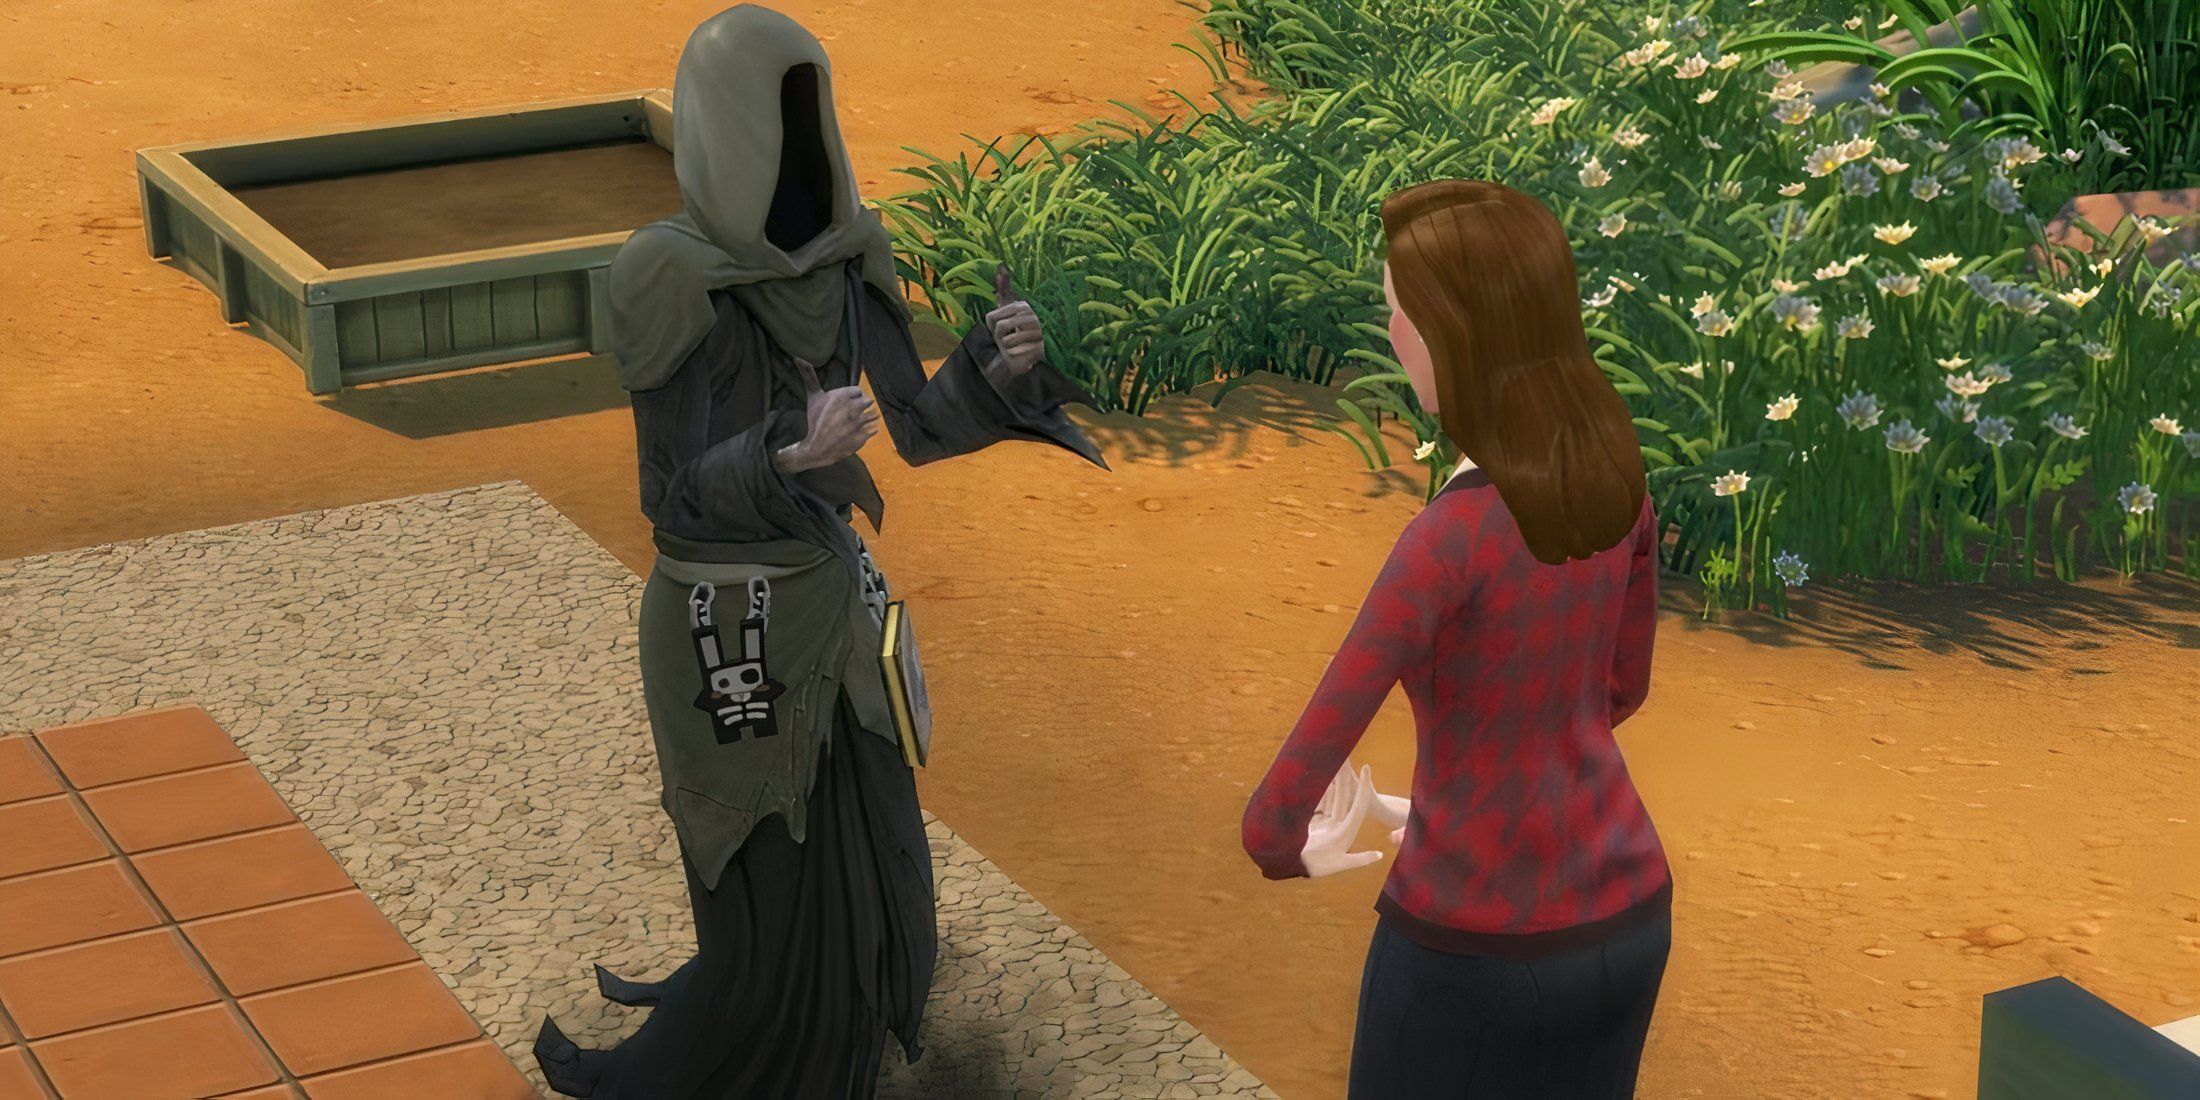 The Grim Reaper talking with someone in The Sims 4